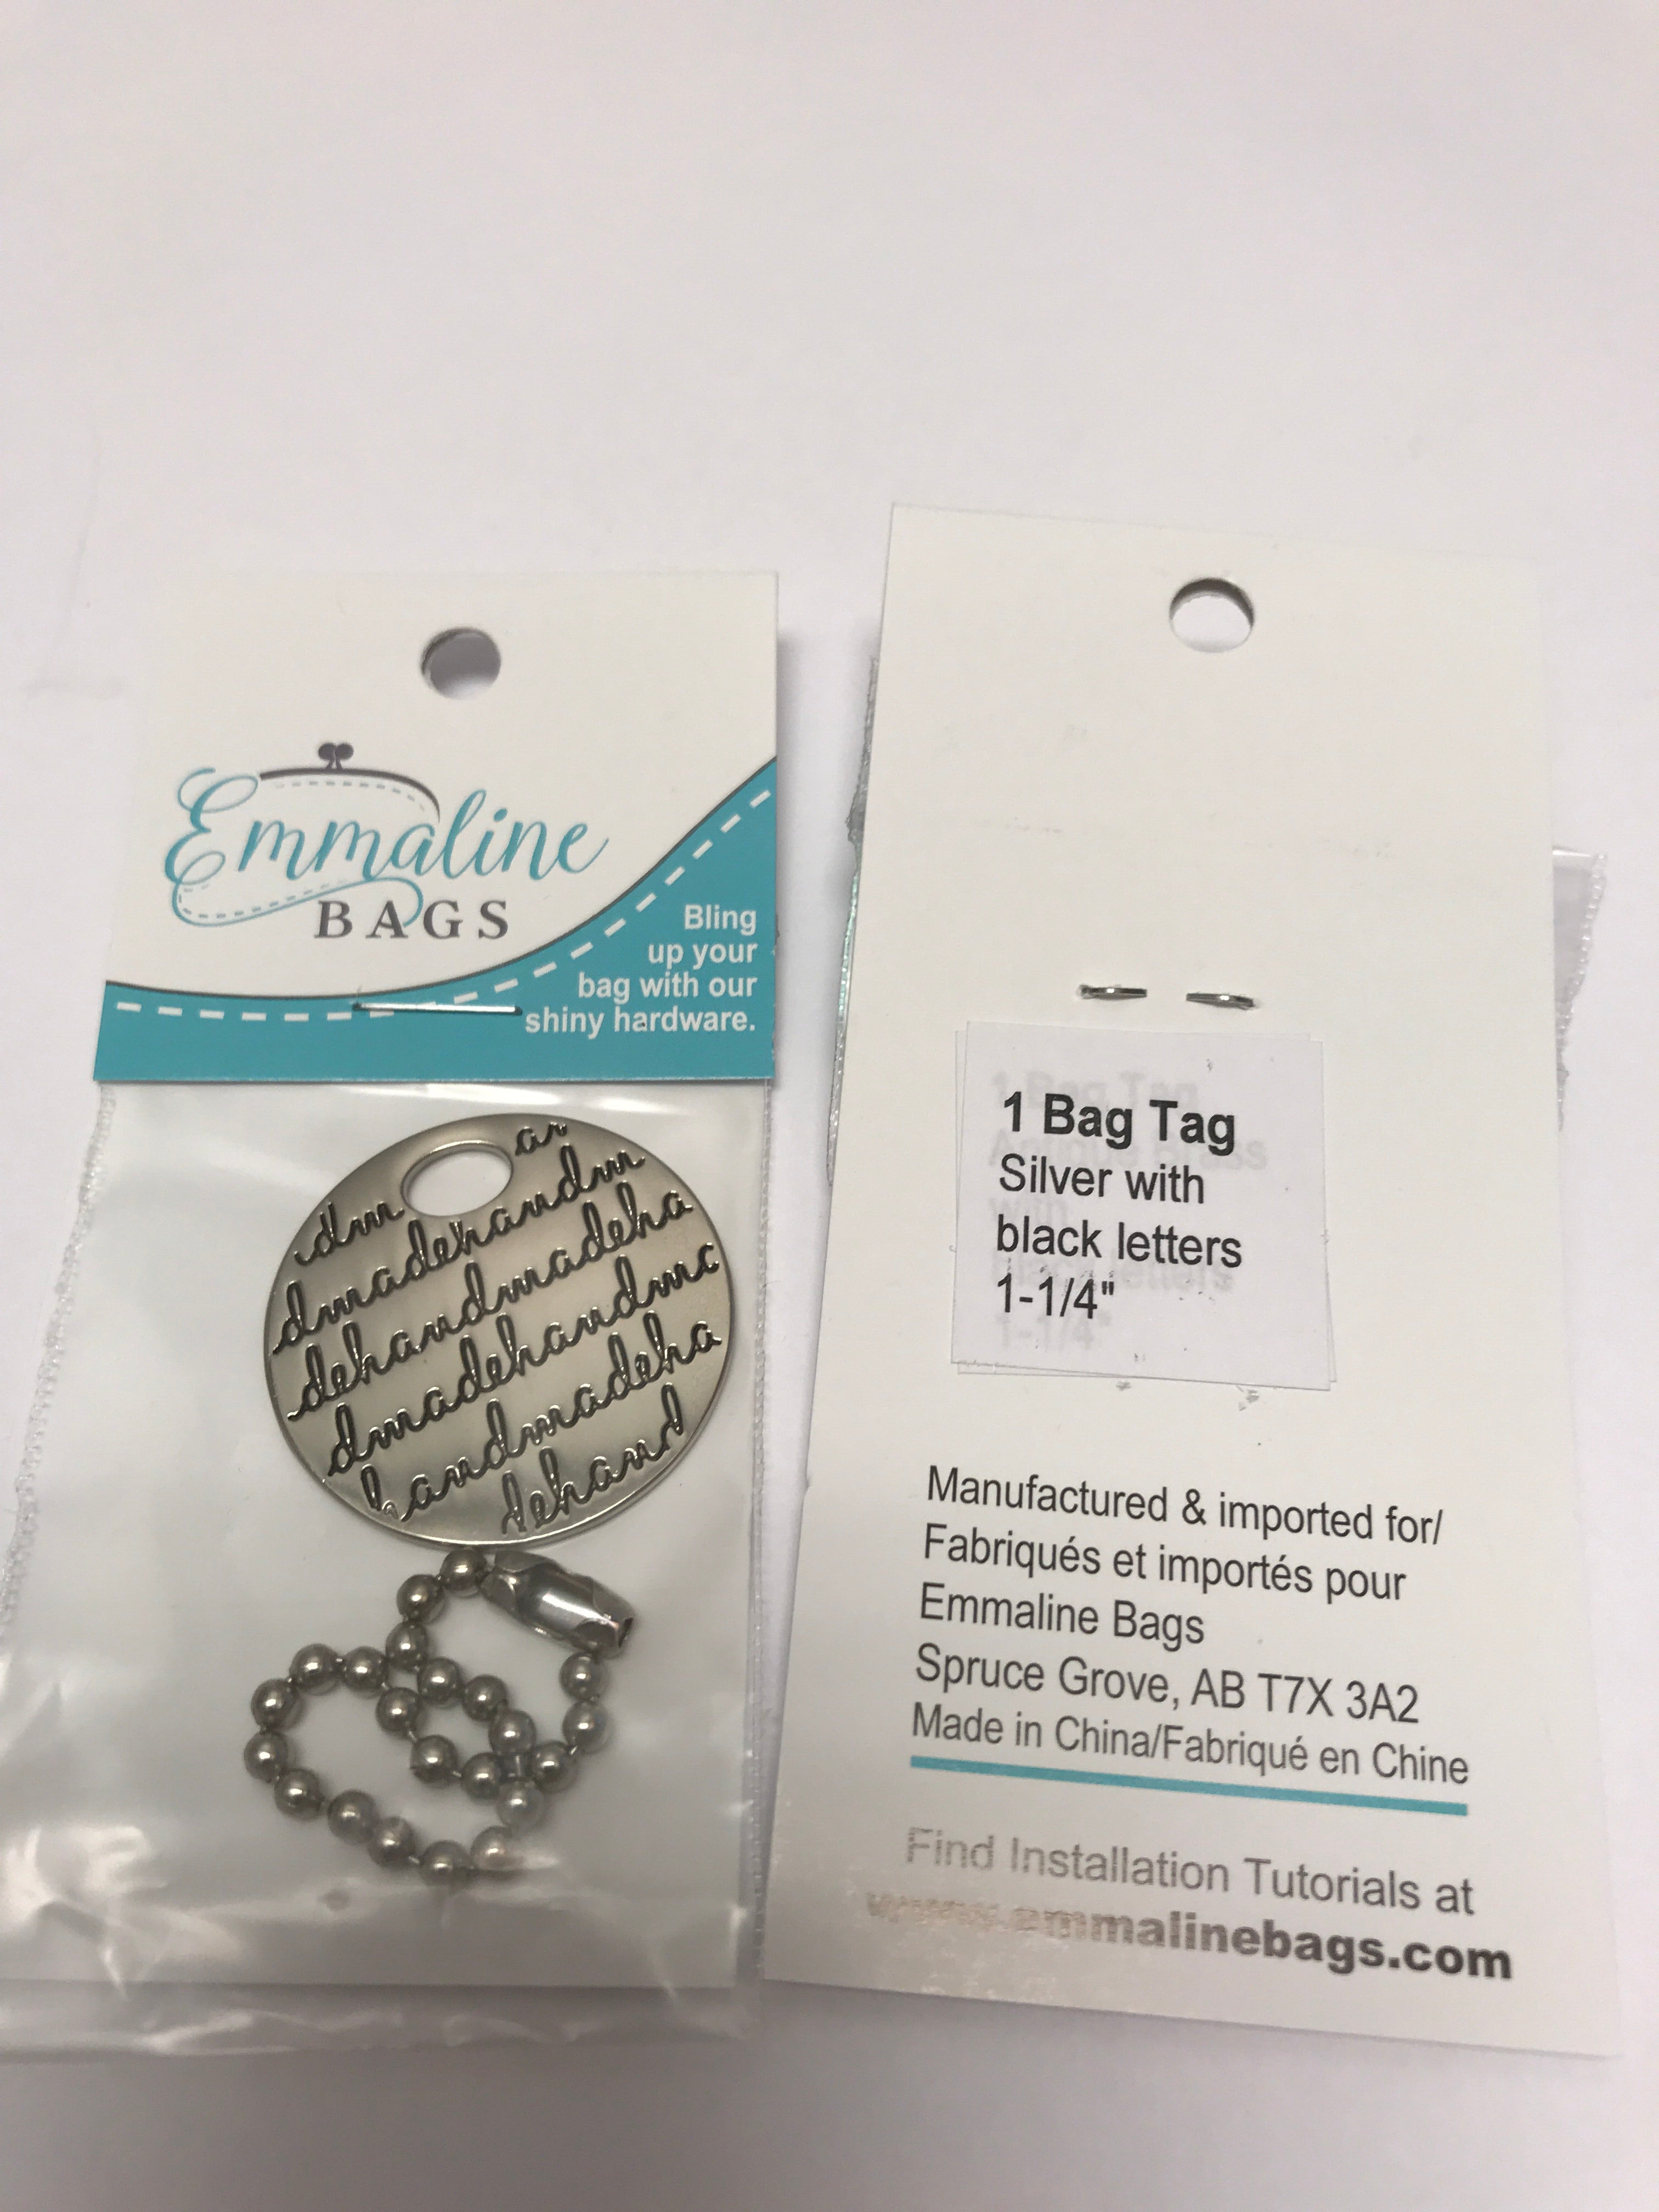 Metal Bag Tag "handmade" - Silver with Black letters